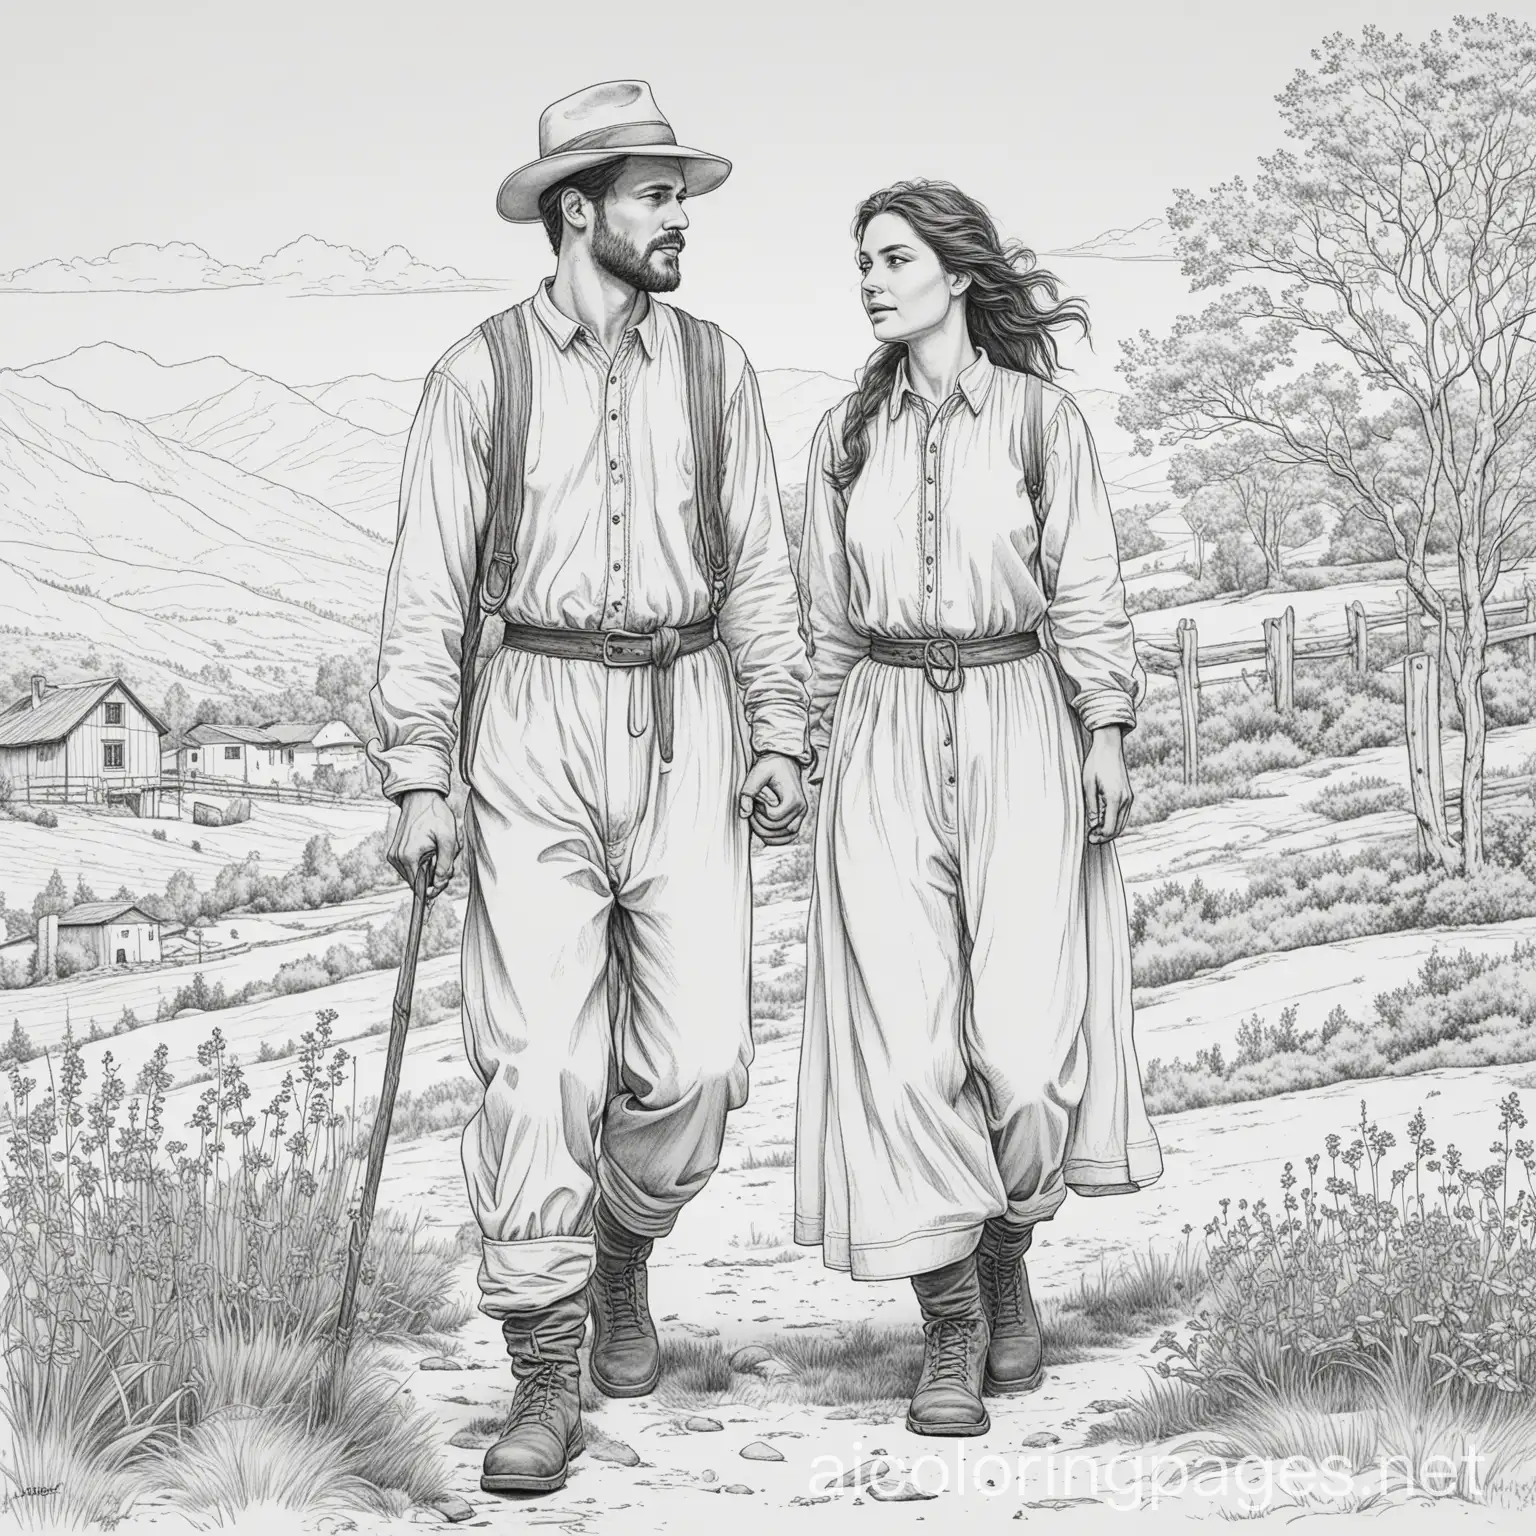 A man and women outdoors from Romania, Coloring Page, black and white, line art, white background, Simplicity, Ample White Space. The background of the coloring page is plain white to make it easy for young children to color within the lines. The outlines of all the subjects are easy to distinguish, making it simple for kids to color without too much difficulty